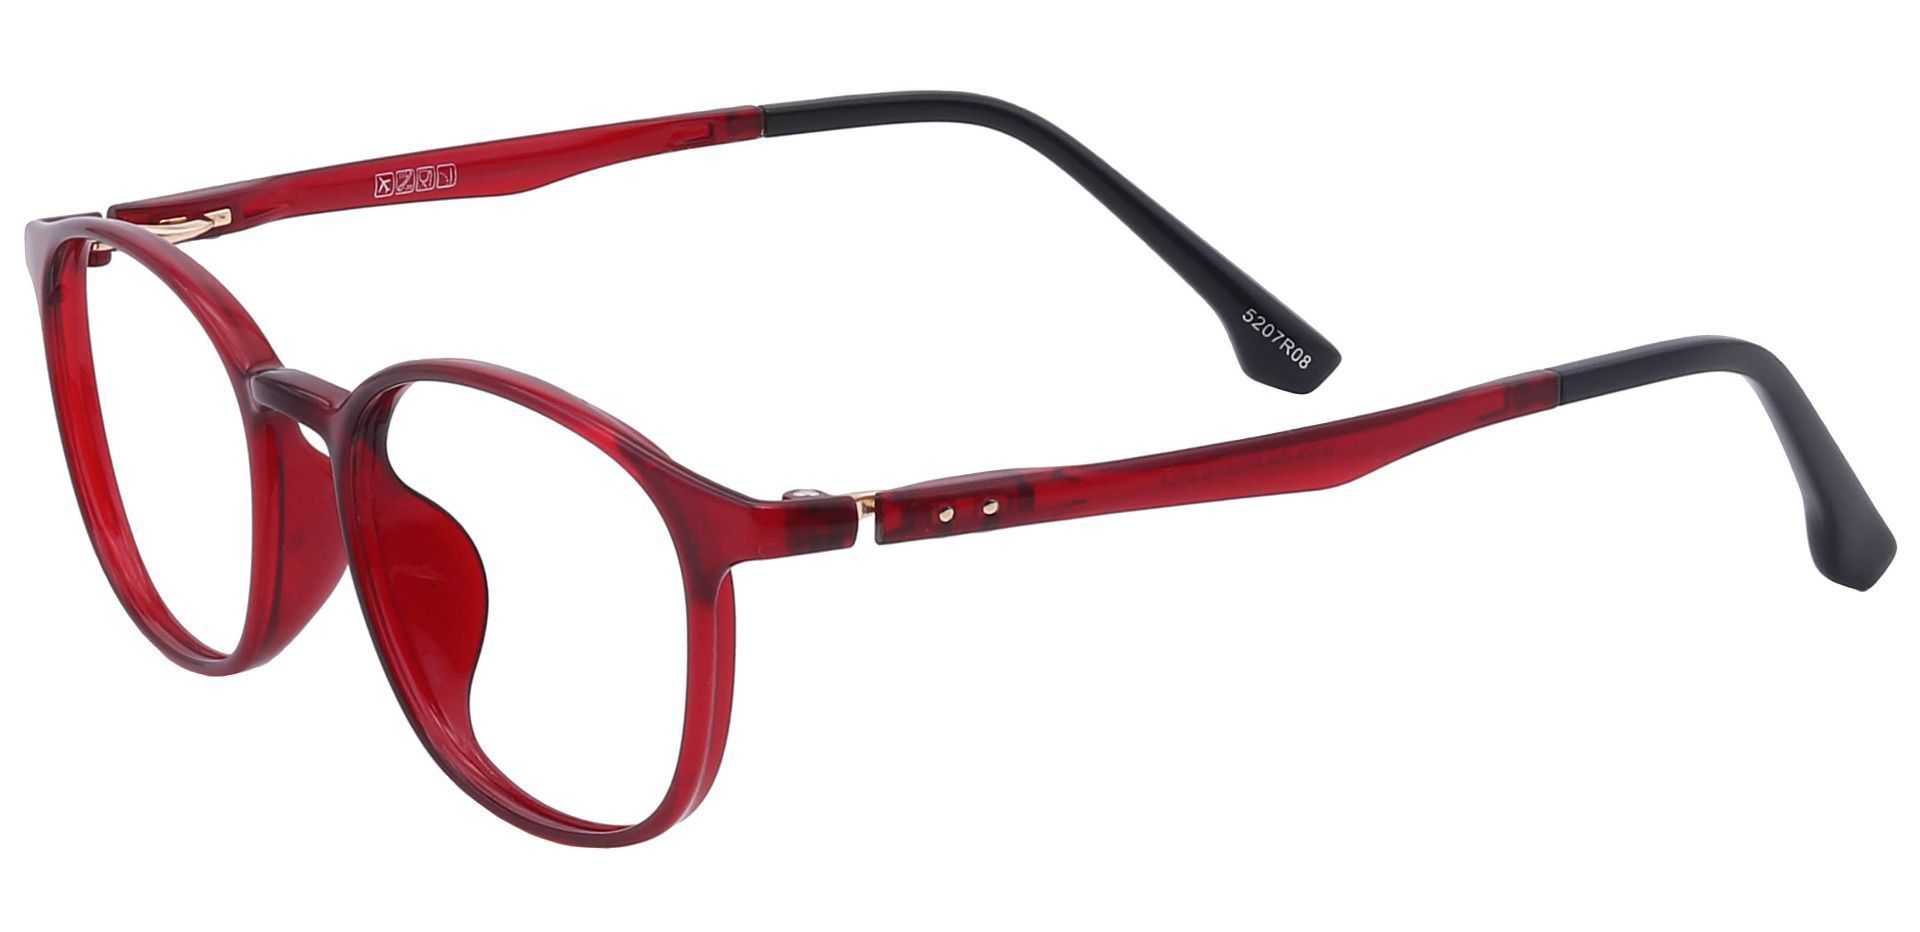 Shannon Oval Reading Glasses - Red